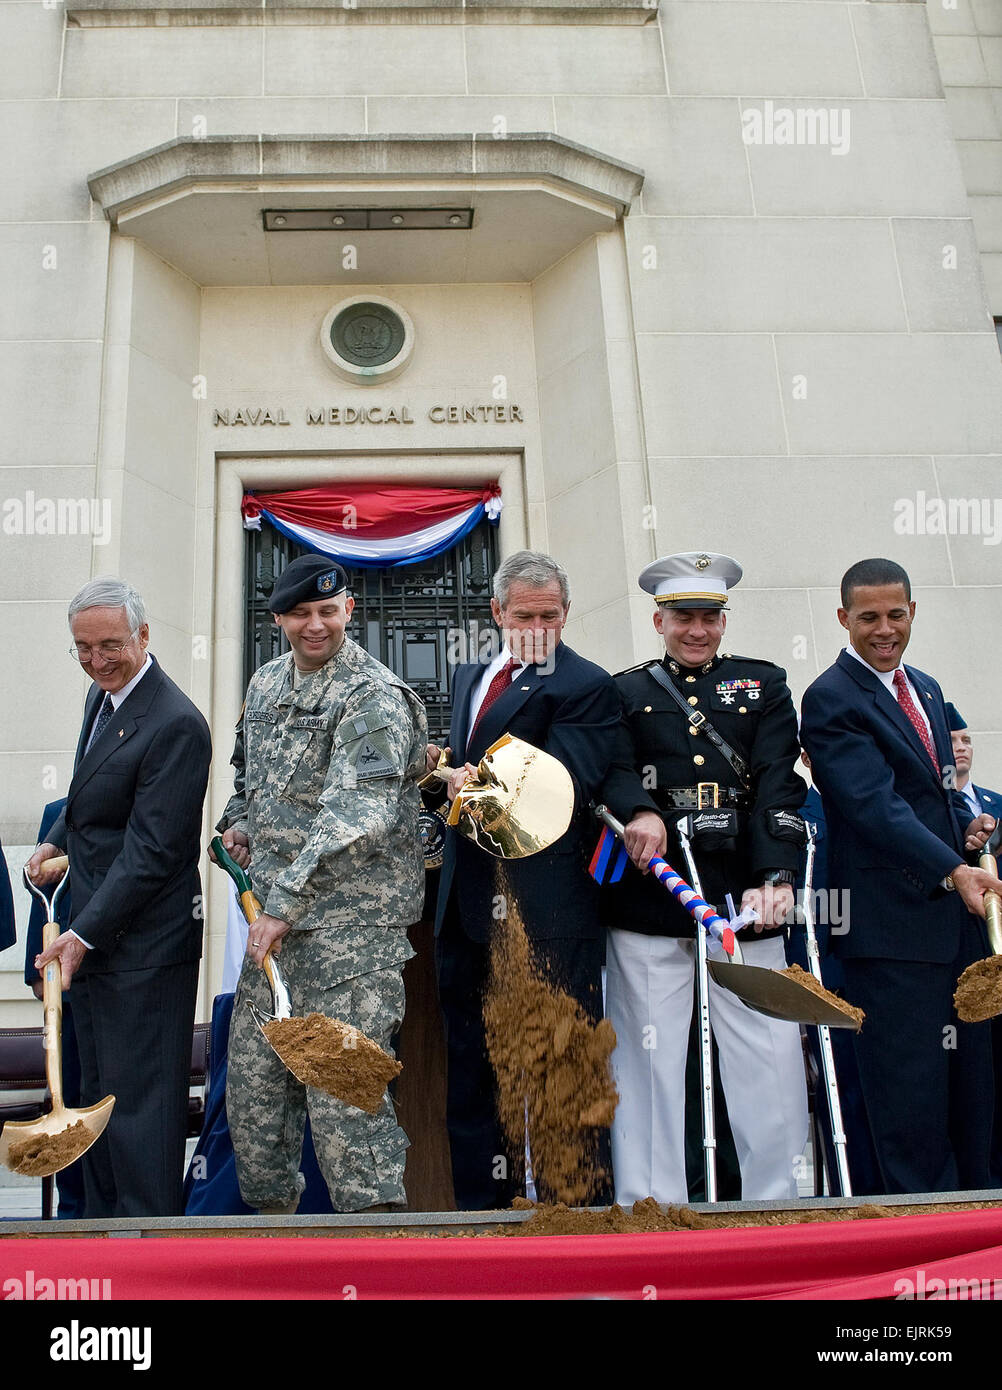 President of the United States George W. Bush and other Defense Department officials break ground for the new Walter Reed National Military Medical Center during a ceremony held at Bethesda Naval Hospital in Maryland July 3, 2008.  Tech. Sgt. Jerry Morrison. Released Stock Photo